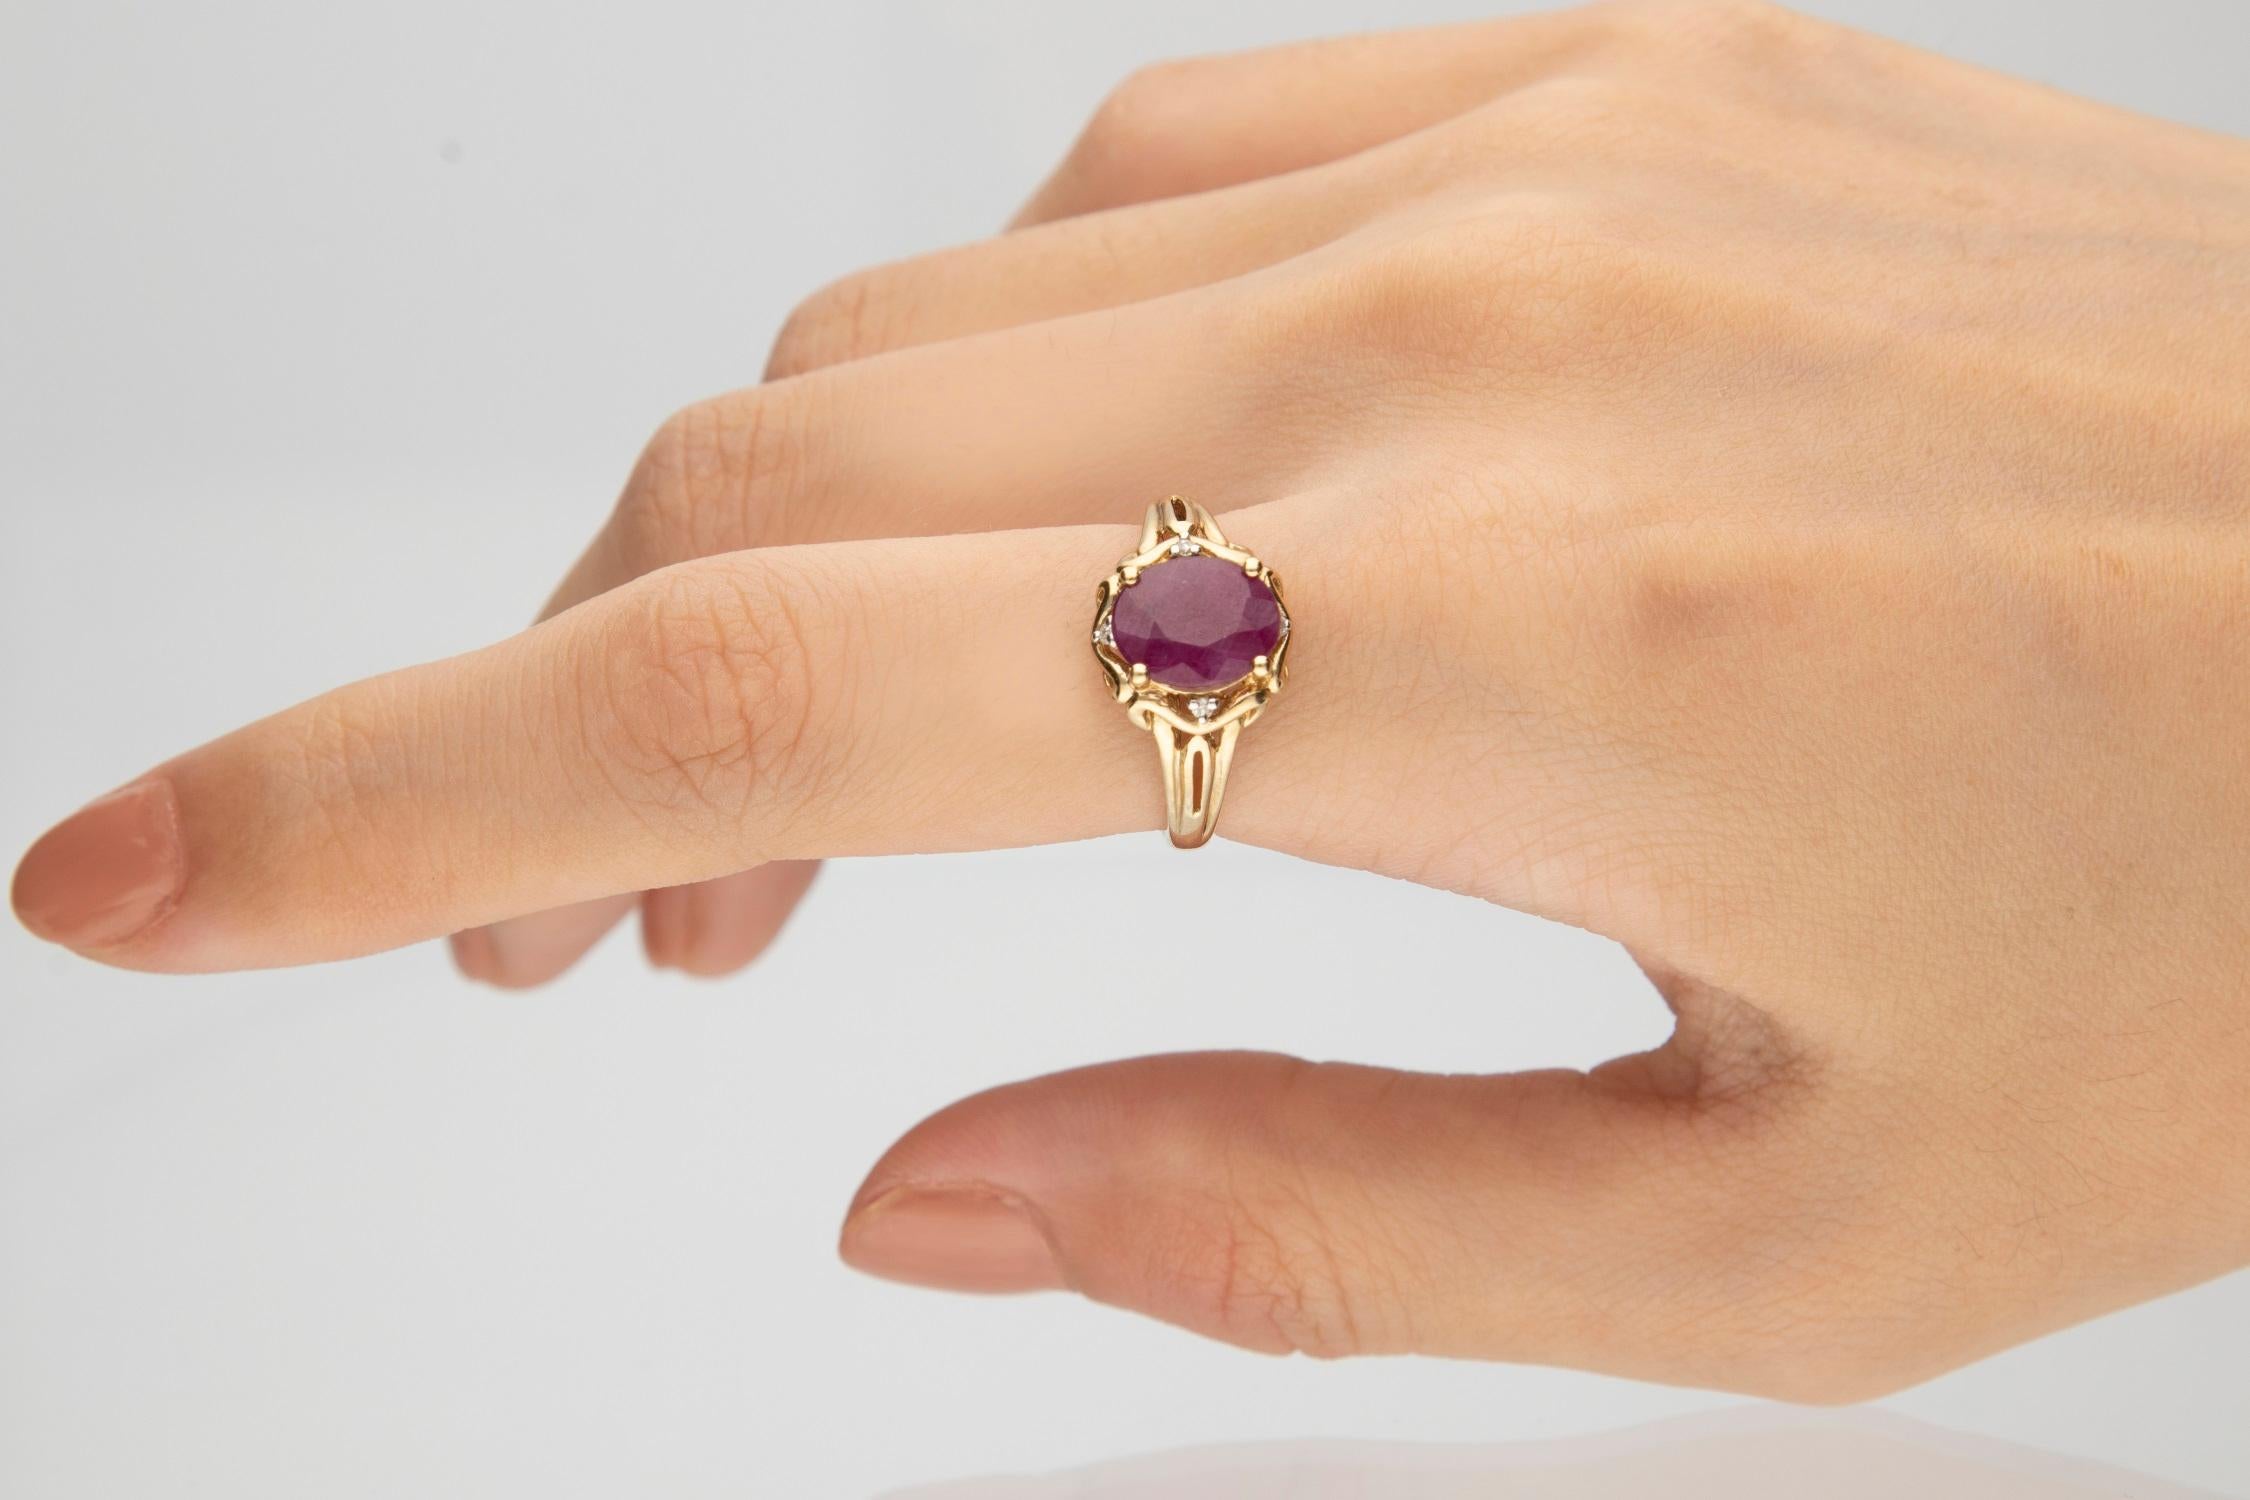 Stunning, timeless and classy eternity Unique Ring. Decorate yourself in luxury with this Gin & Grace Ring. The 10K Yellow Gold jewelry boasts with Oval-cut 1 pcs 2.22 carat Ruby and Natural Round-cut white Diamond (4 Pcs) 0.03 Carat accent stones